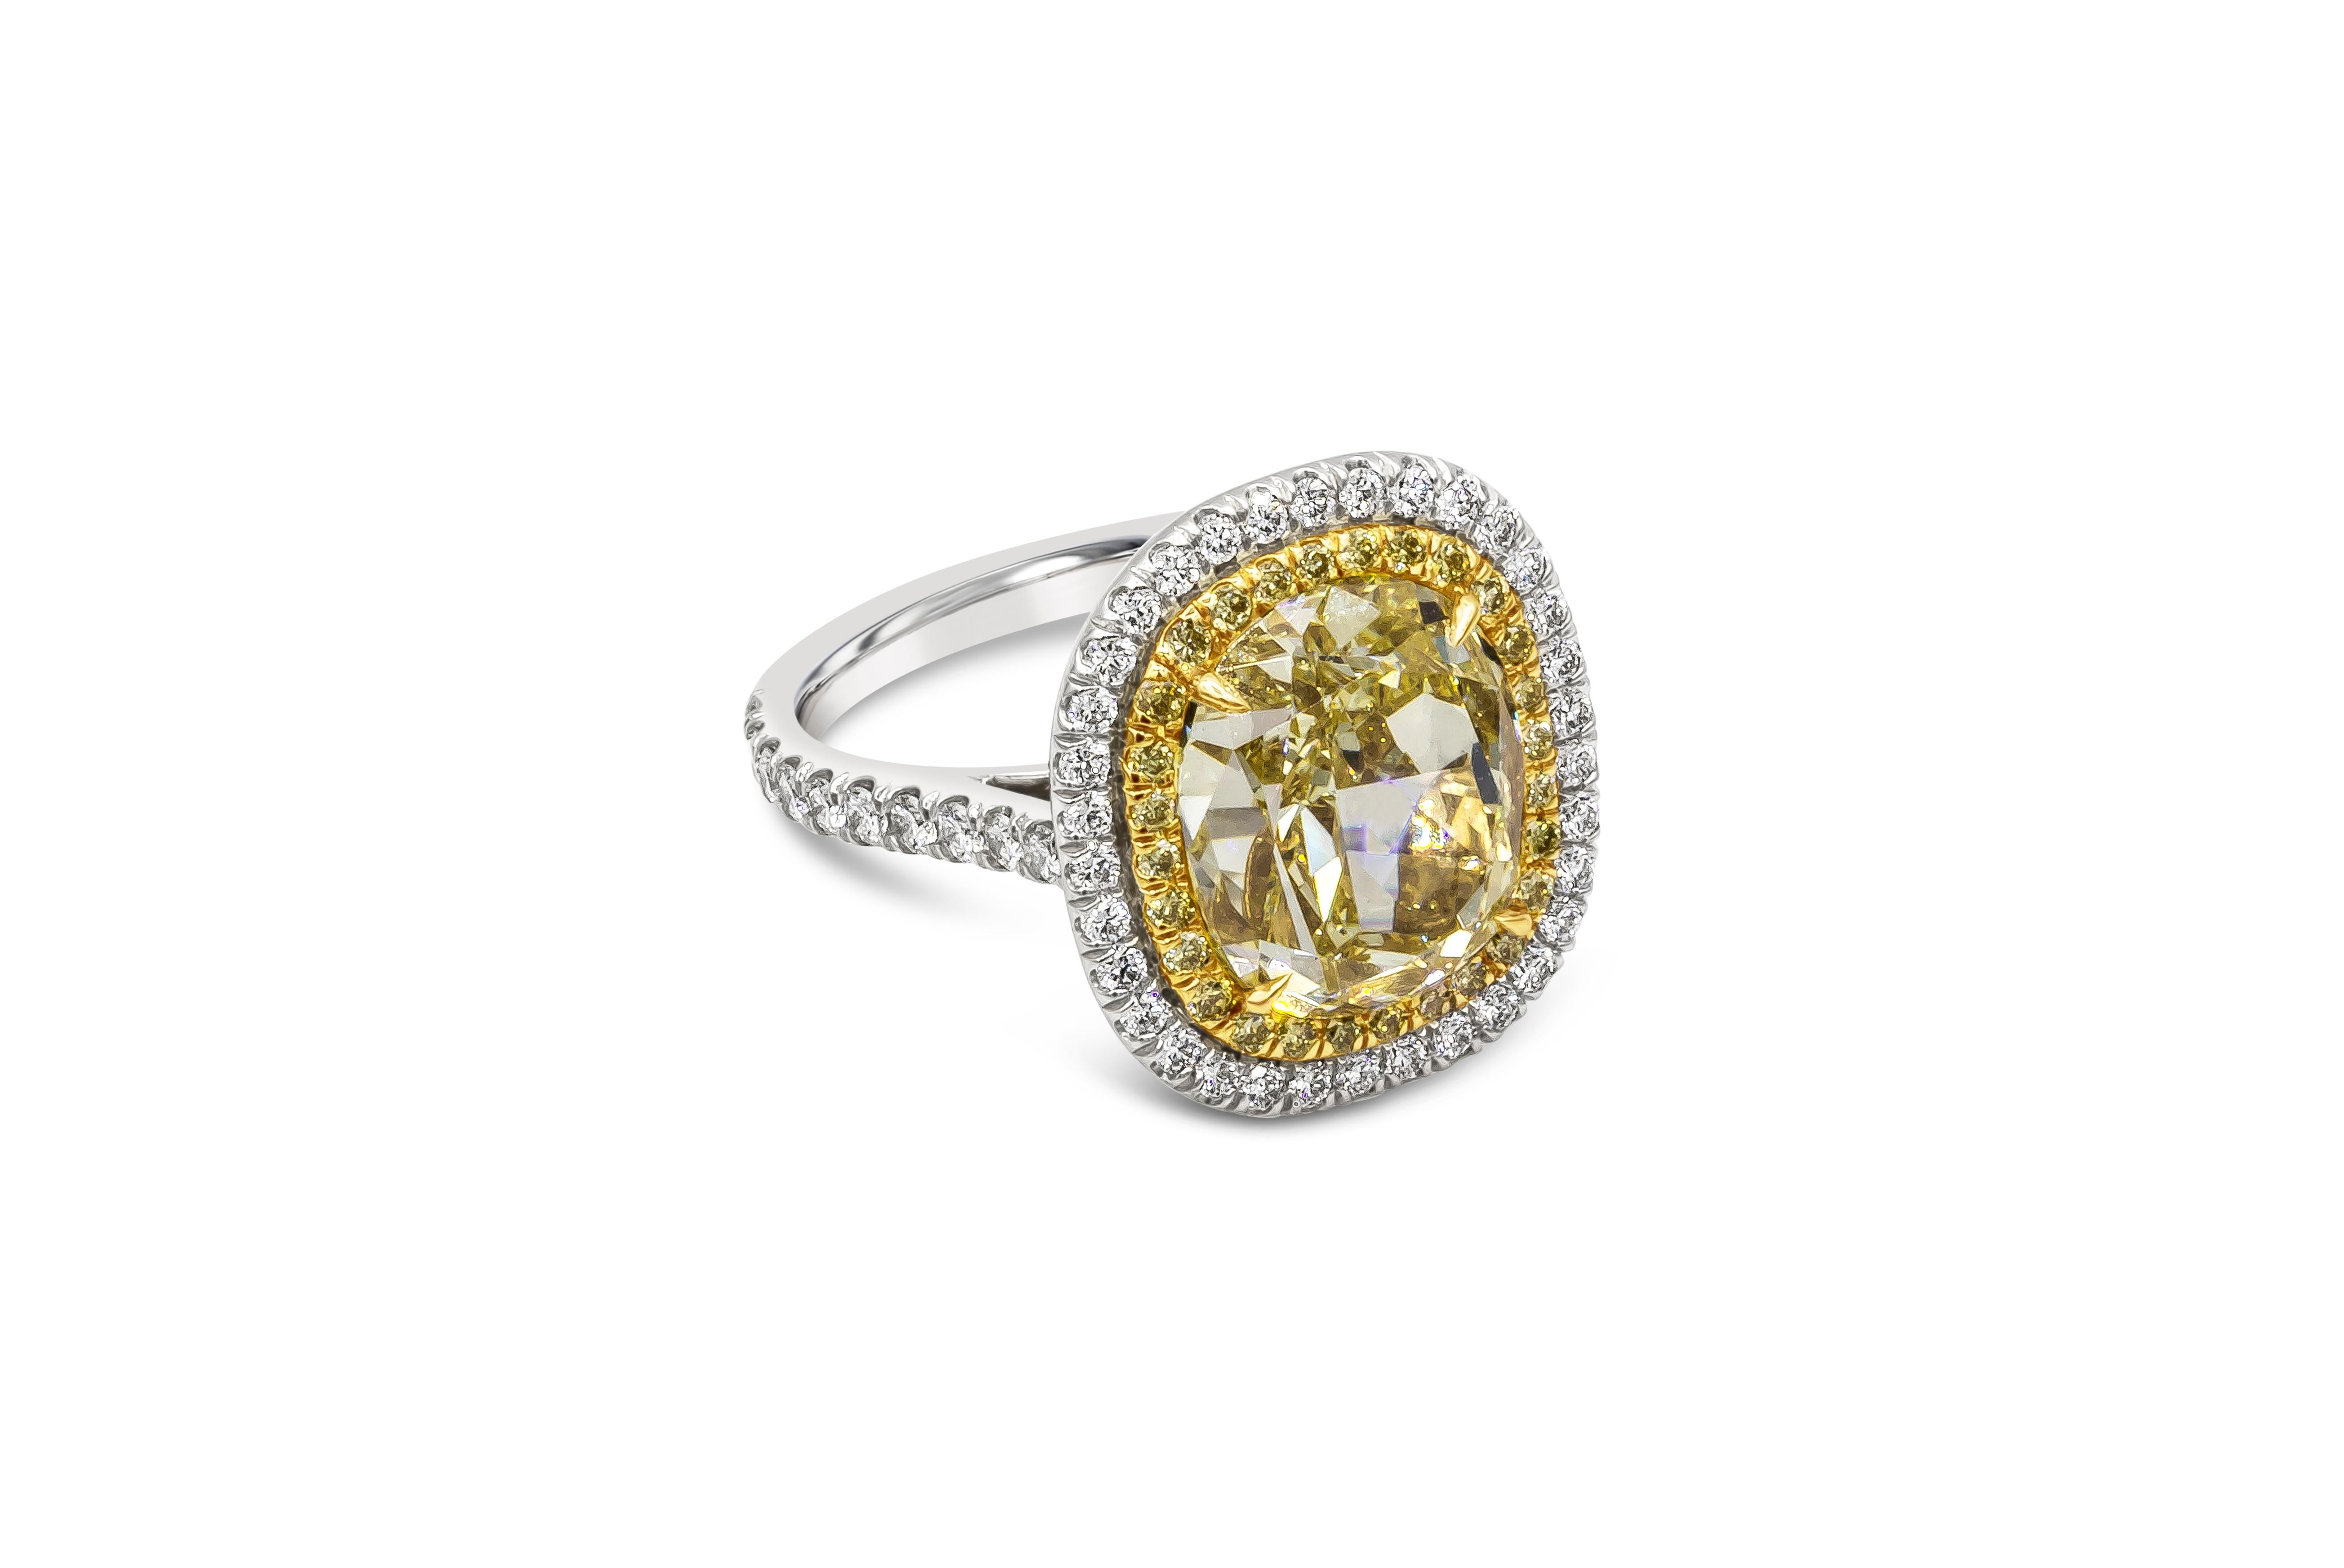 Color rich and well crafted halo engagement ring showcasing a vibrant 7.06 carat oval cut diamond set in a four prong 18k yellow gold setting encrusted with 28 brilliant round fancy yellow diamonds weighing 0.25 carats total. Surrounded by a row of